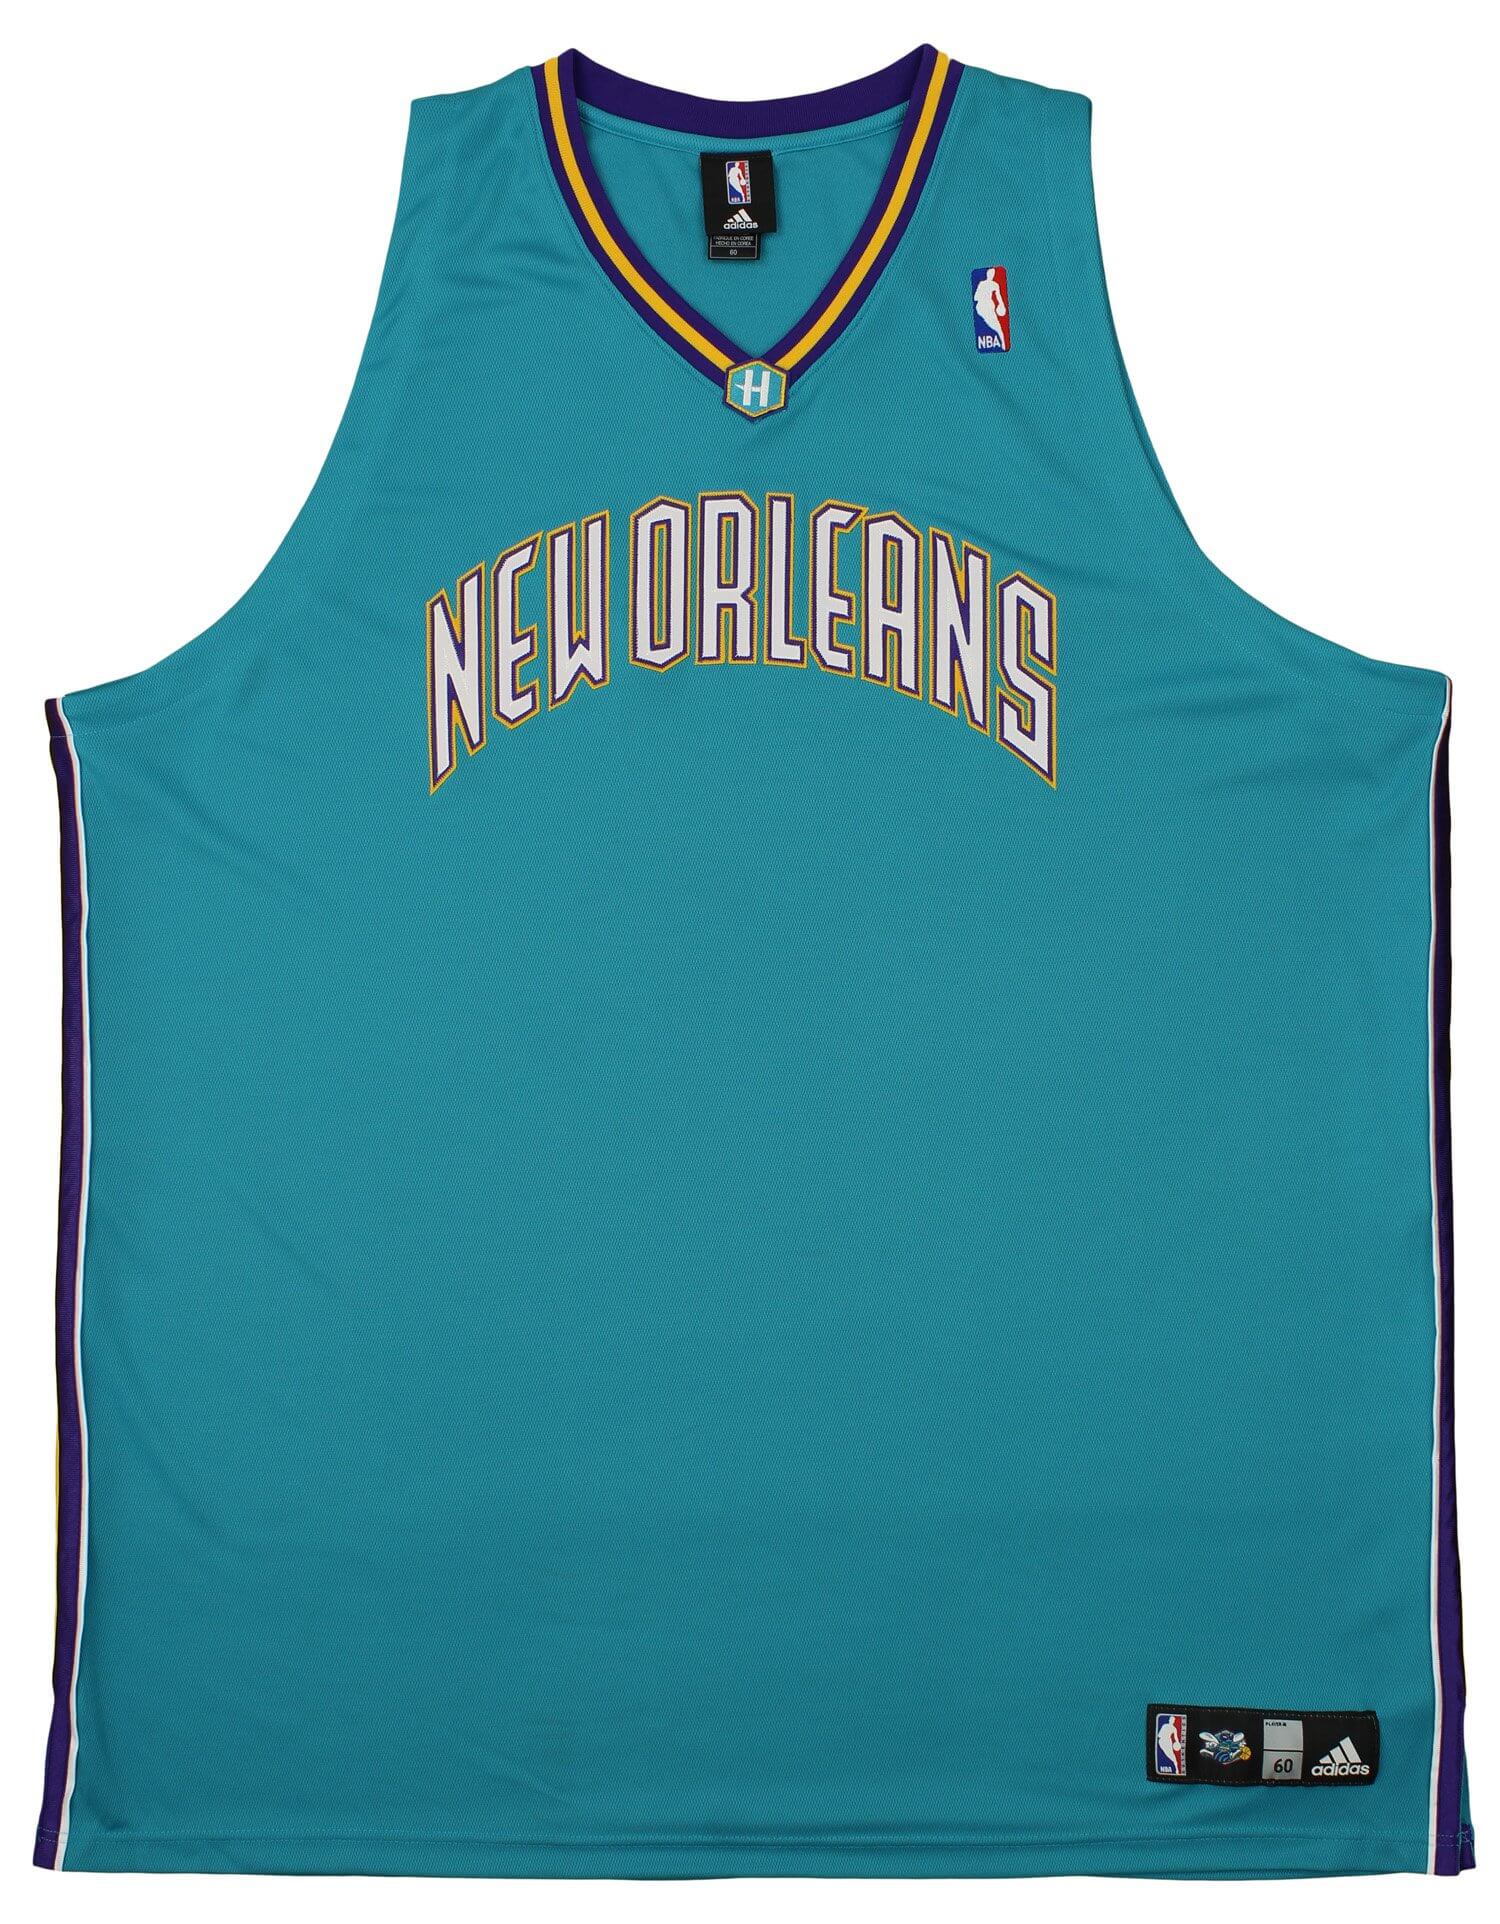 NEW ORLEANS HORNETS NBA BASKETBALL VINTAGE JERSEY AUTHENTIC ADIDAS